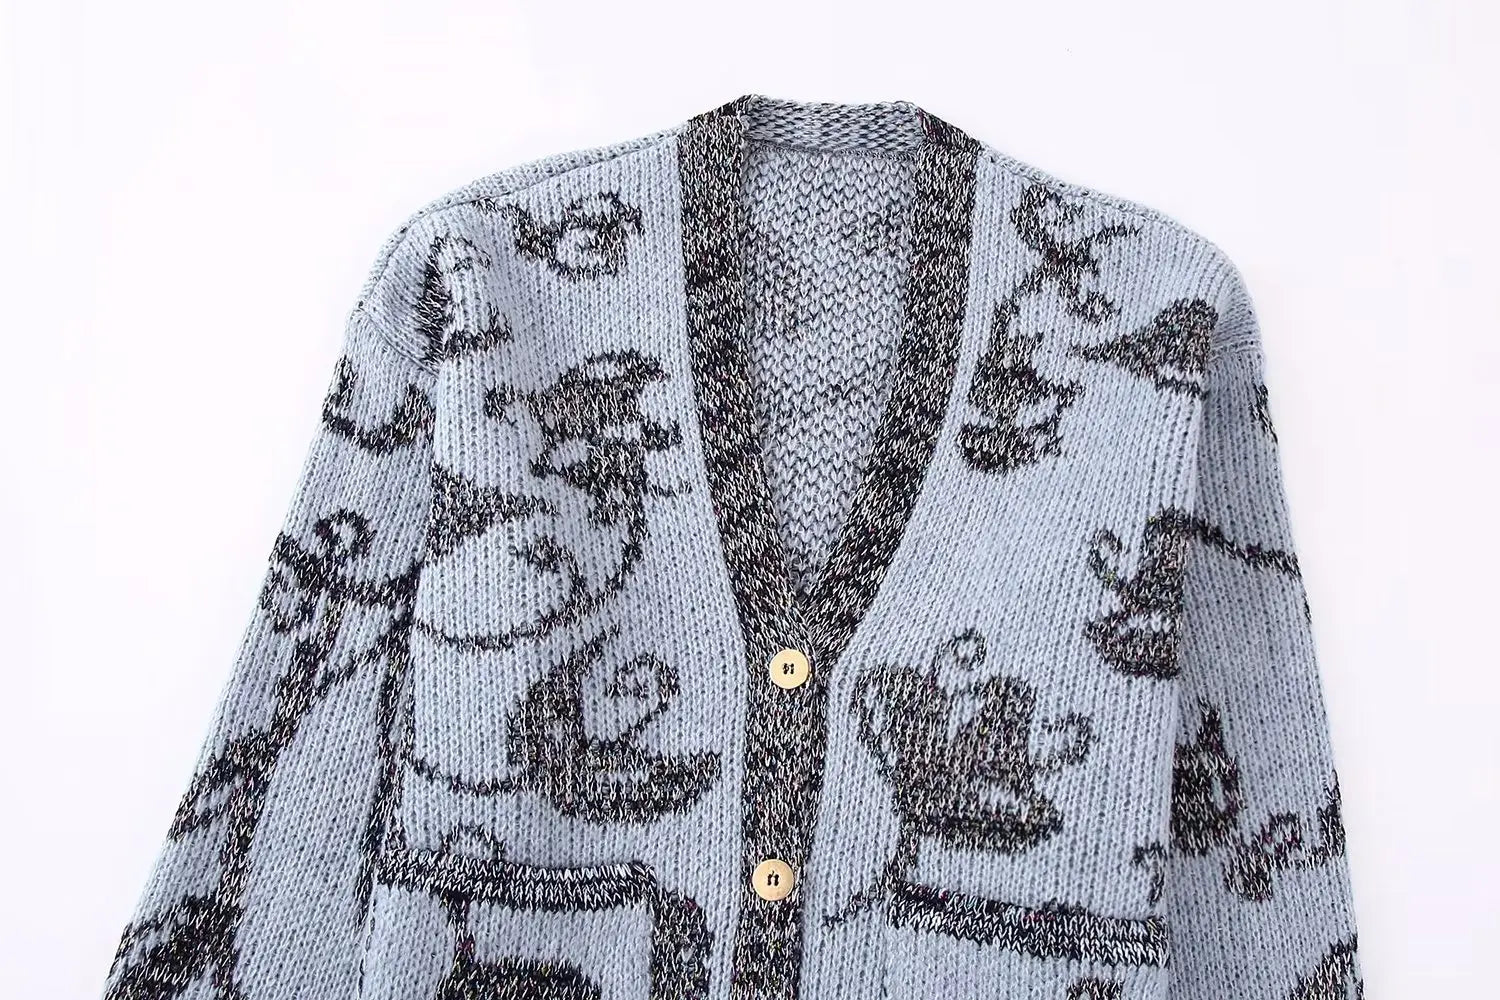 Gray and Light Blue  Jacquard Knitted Cardigan